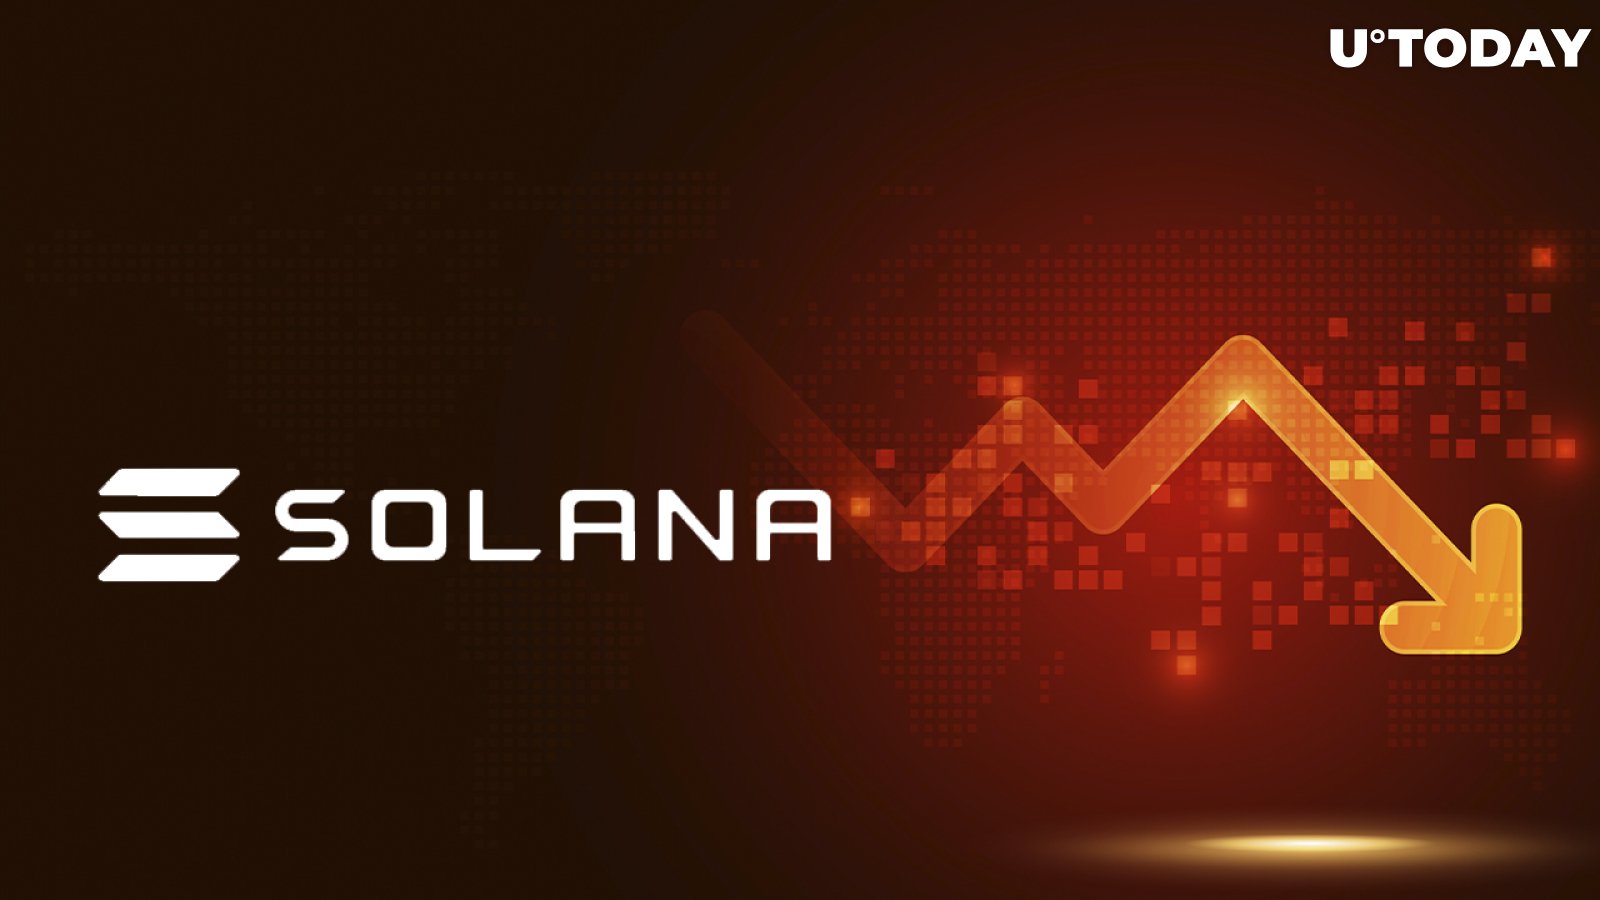 Solana Network Goes Offline Again, Now DDoS Attack May Be Reason